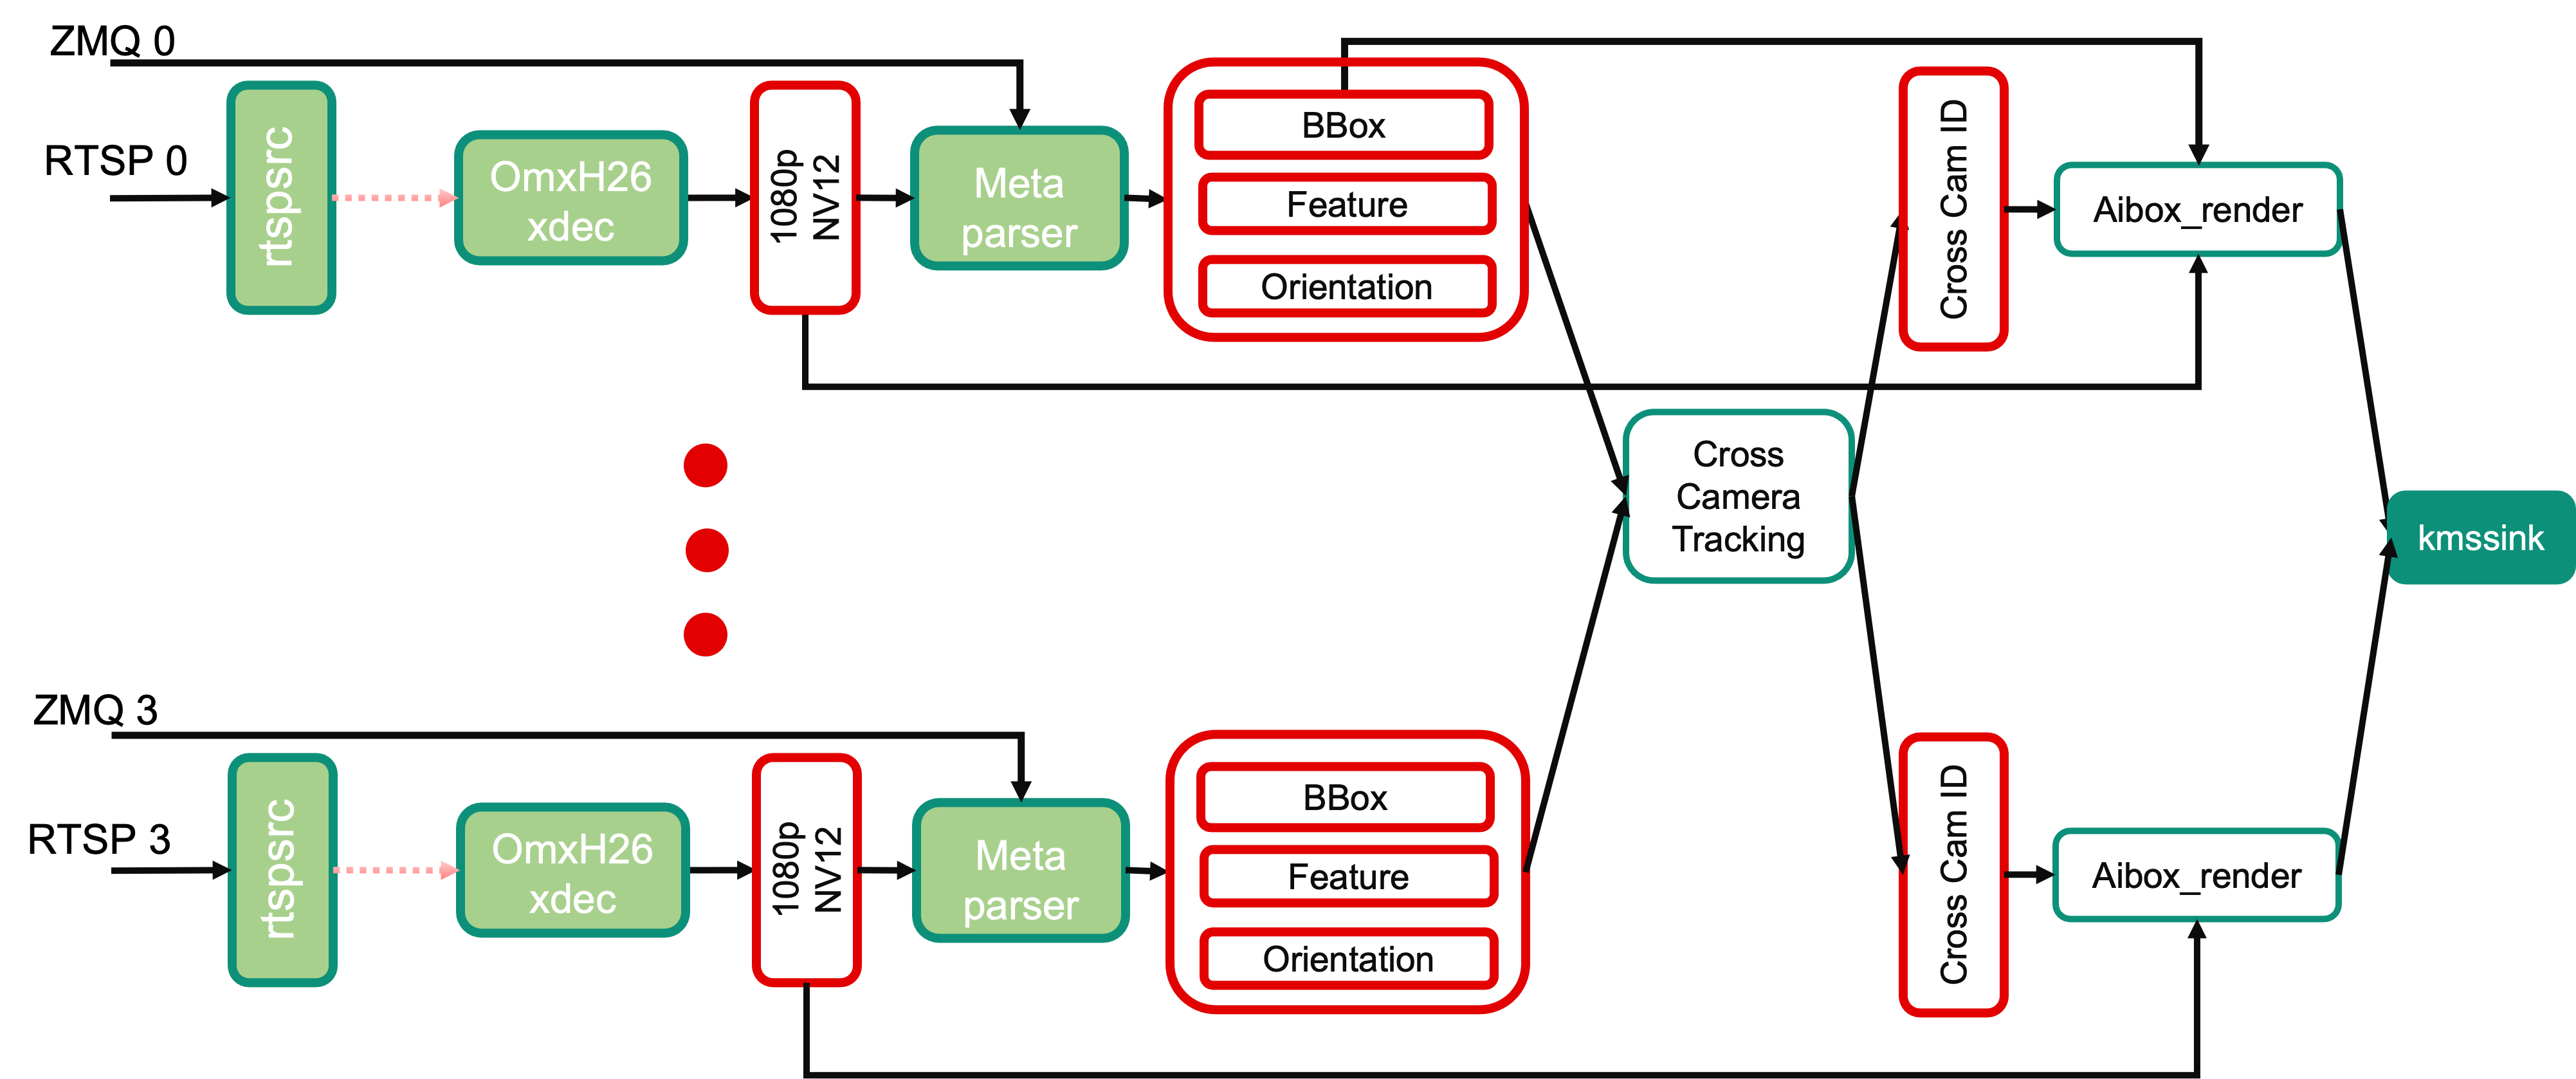 client_monitor_data_flow